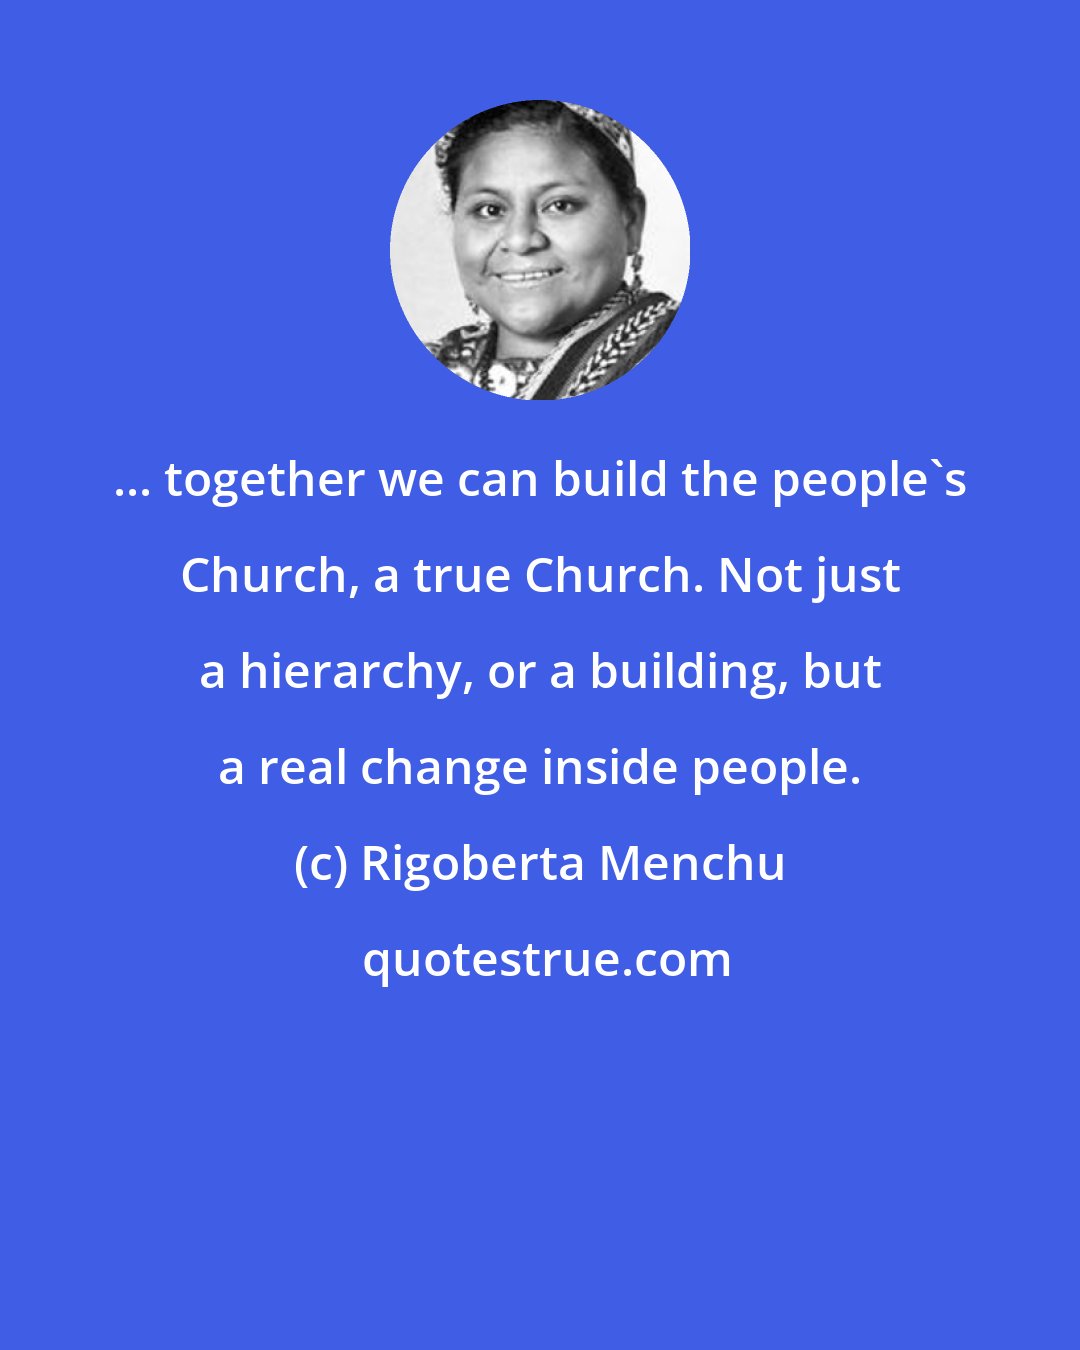 Rigoberta Menchu: ... together we can build the people's Church, a true Church. Not just a hierarchy, or a building, but a real change inside people.